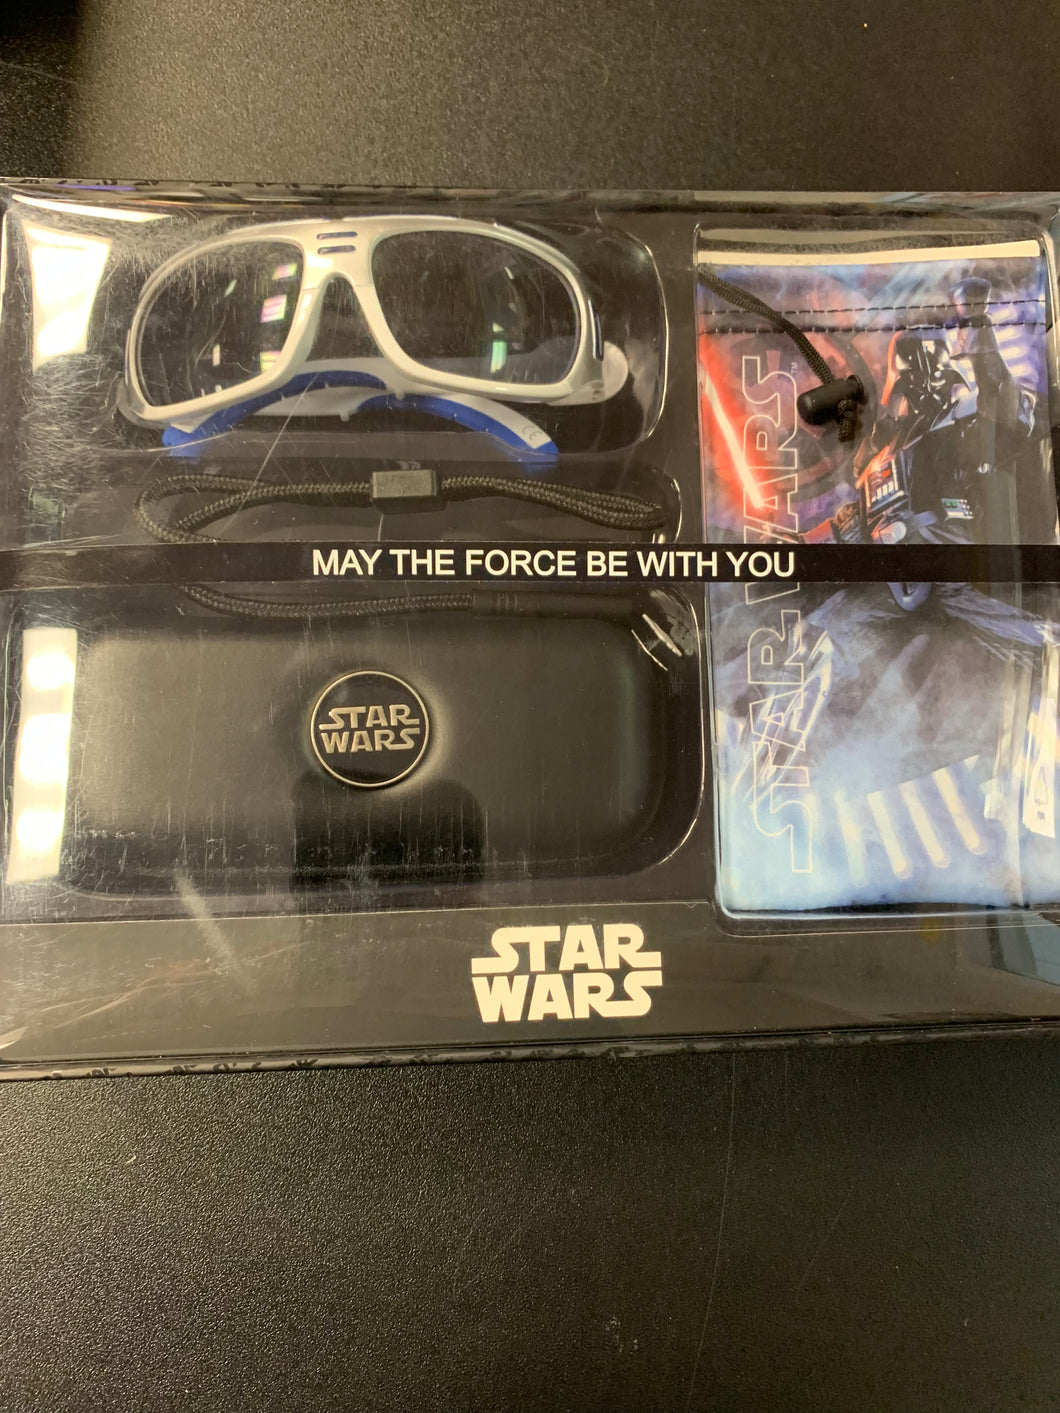 STAR WARS MAY THE FORCE BE WITH YOU SUNGLASSES R2-D2 with Vader Bag GIFT SET